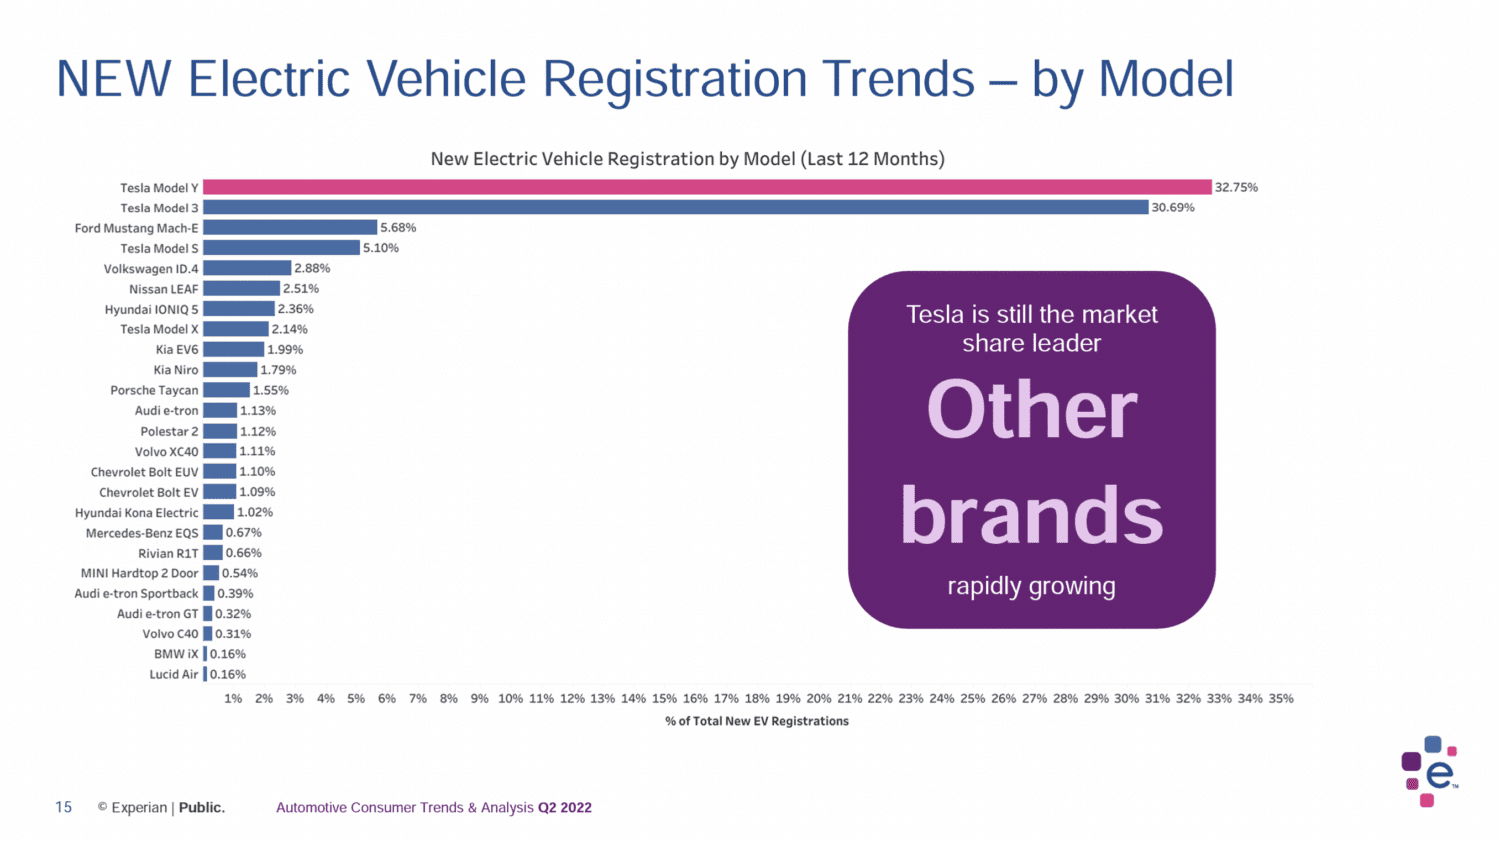 Experian Automotive Consumer Trends & Analysis Q2 2022: Electric Vehicles